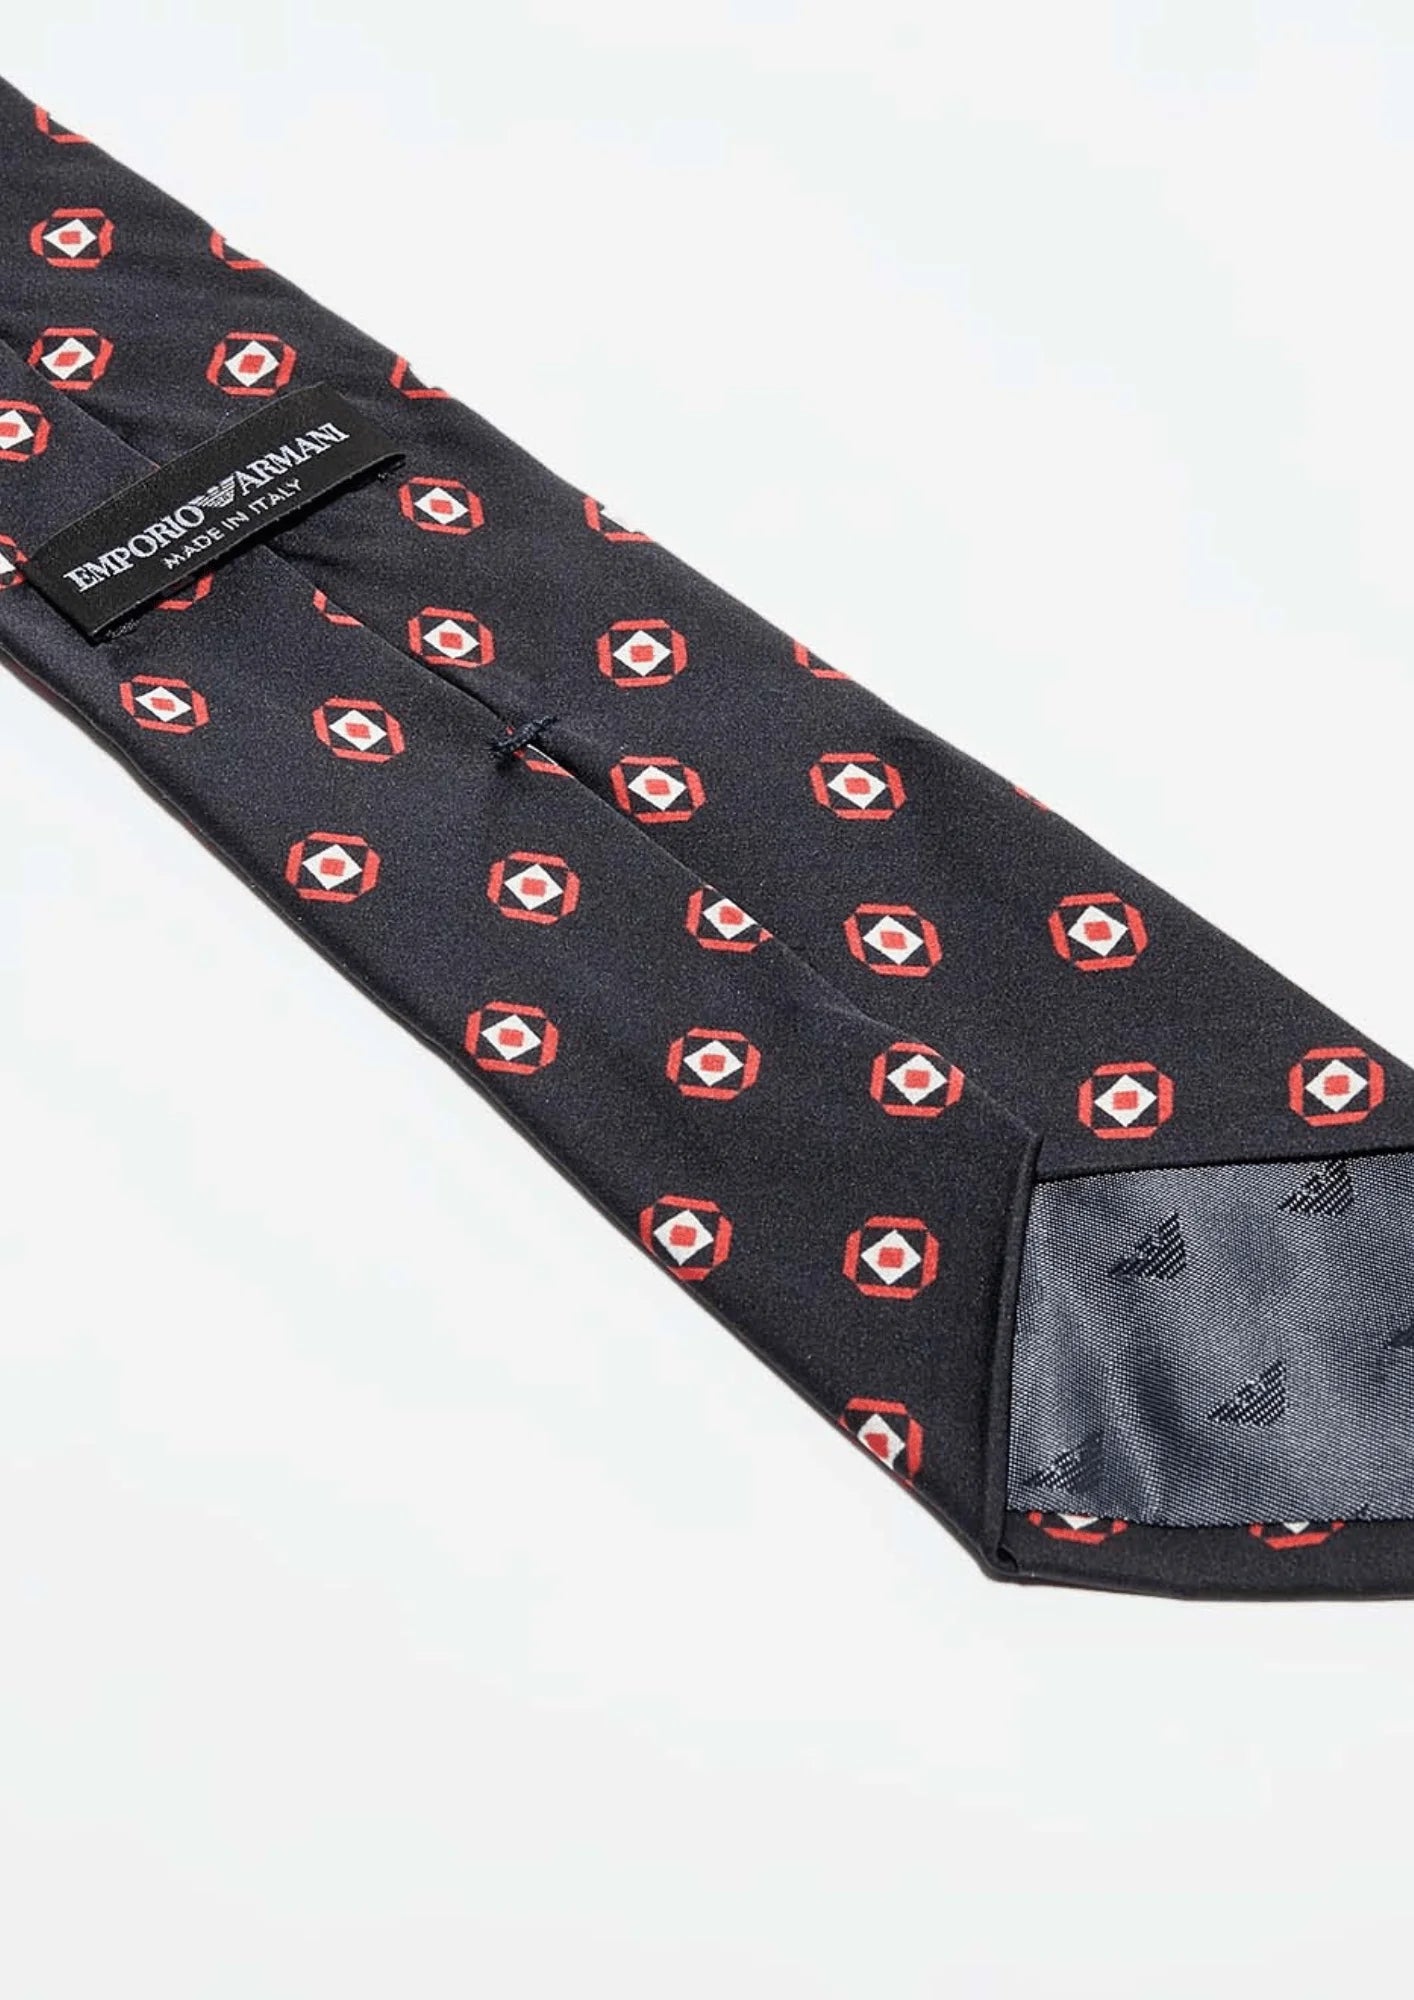 BLACK SILK TIE WITH RED AND WHITE PATTERN